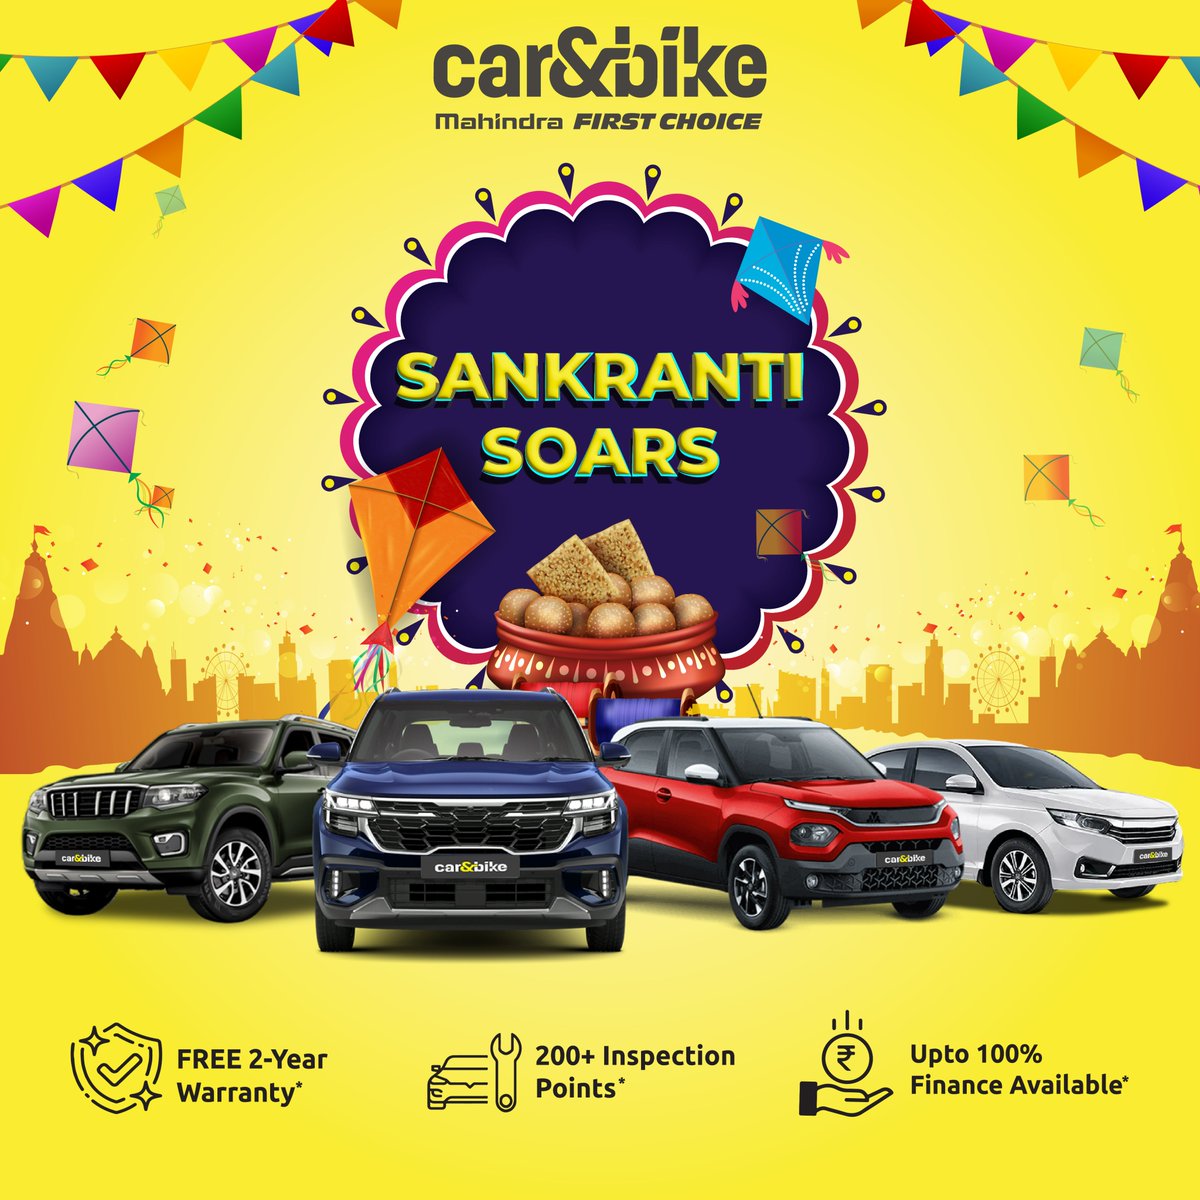 Unveiling our Makar Sankranti exclusive collection of pre-owned cars. Visit our store to embrace the journey ahead with style and substance! #MakarSankranti #Preownedcars #Car #MFCWL